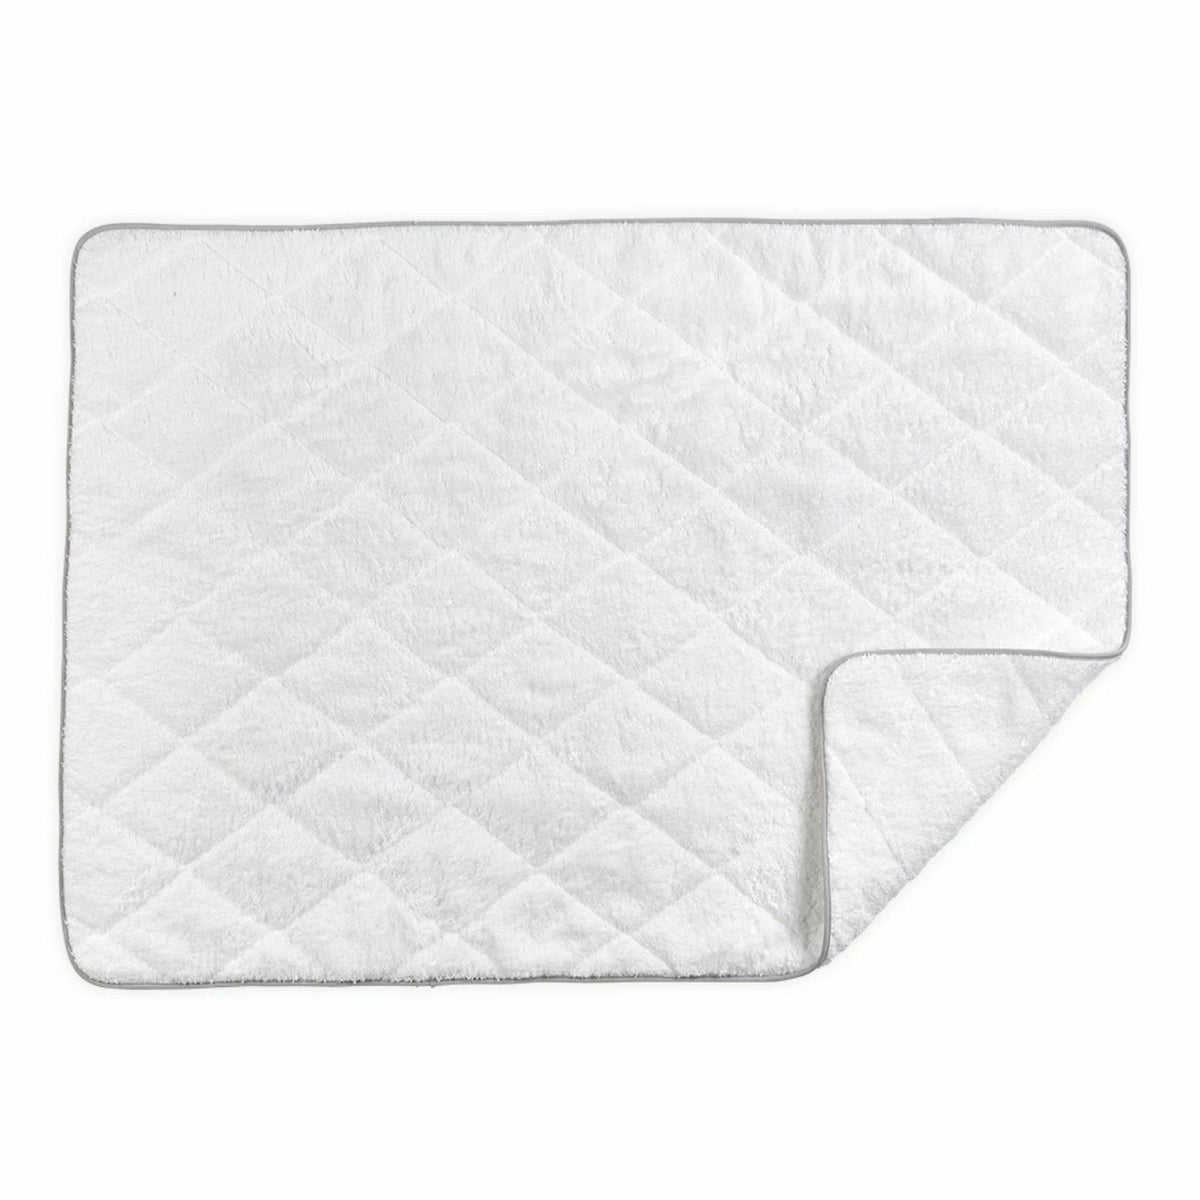 Matouk Cairo Quilted Tub Mat White/Silver